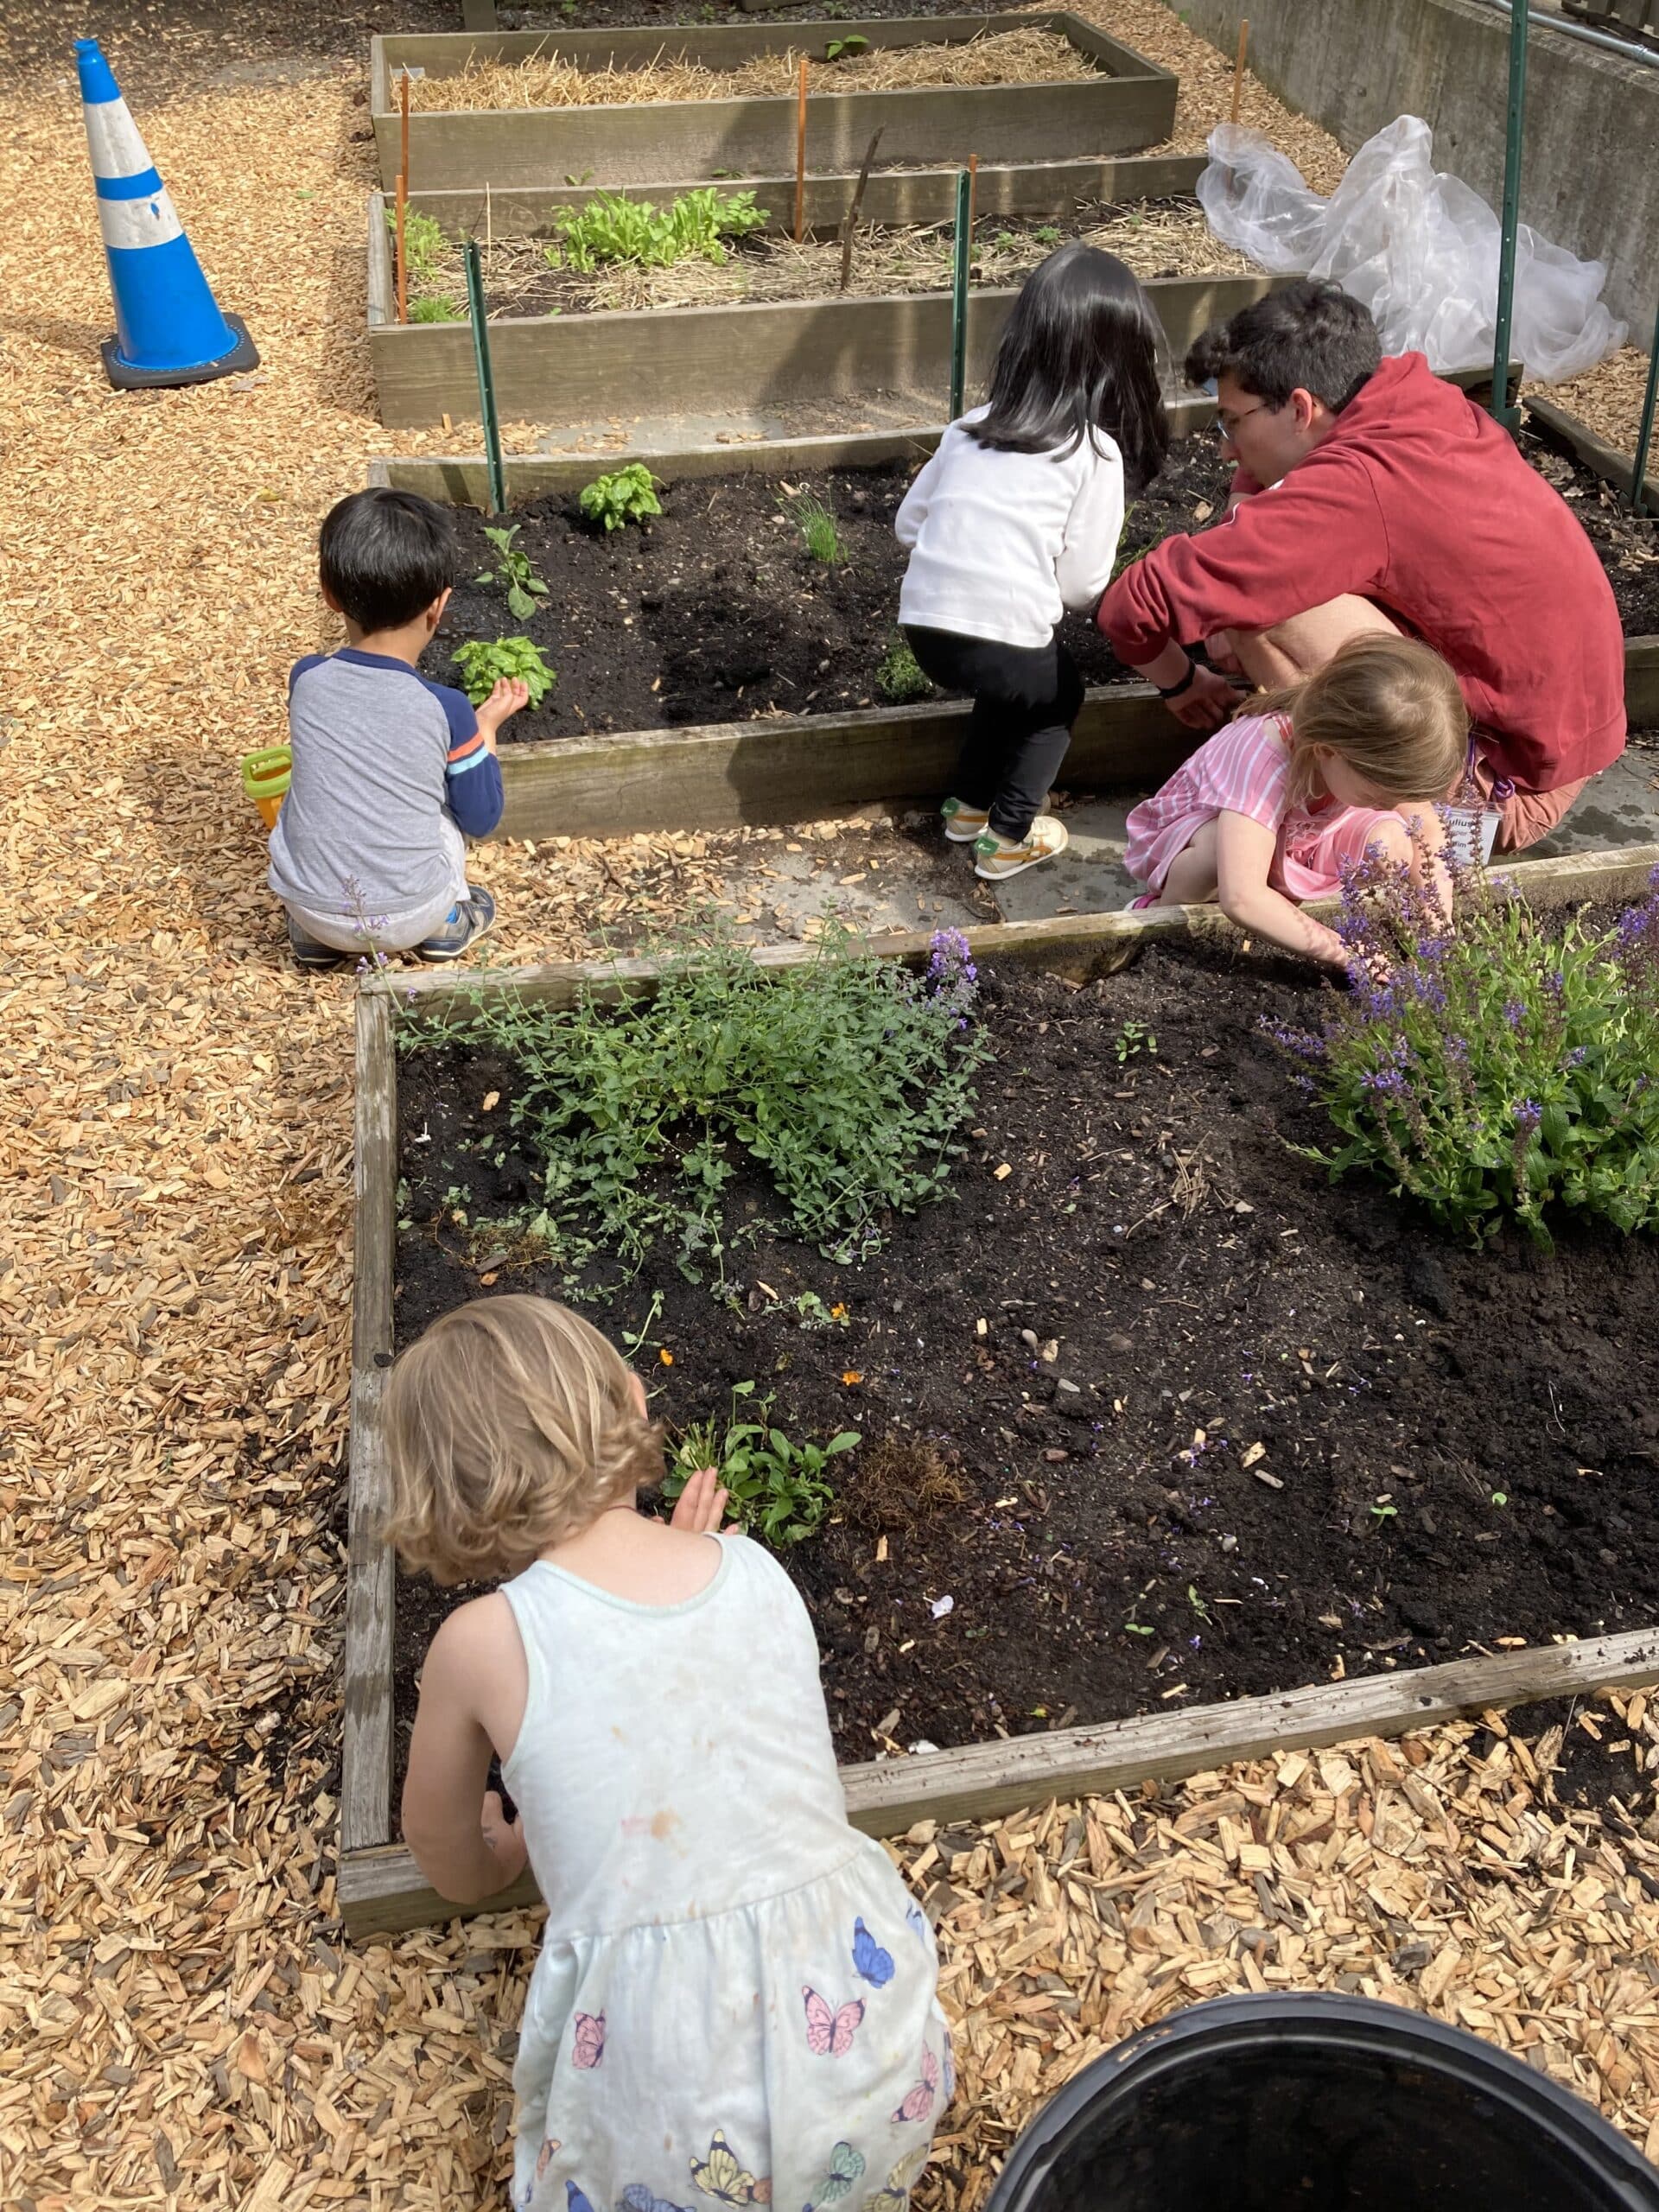 Children digging and planting a garden